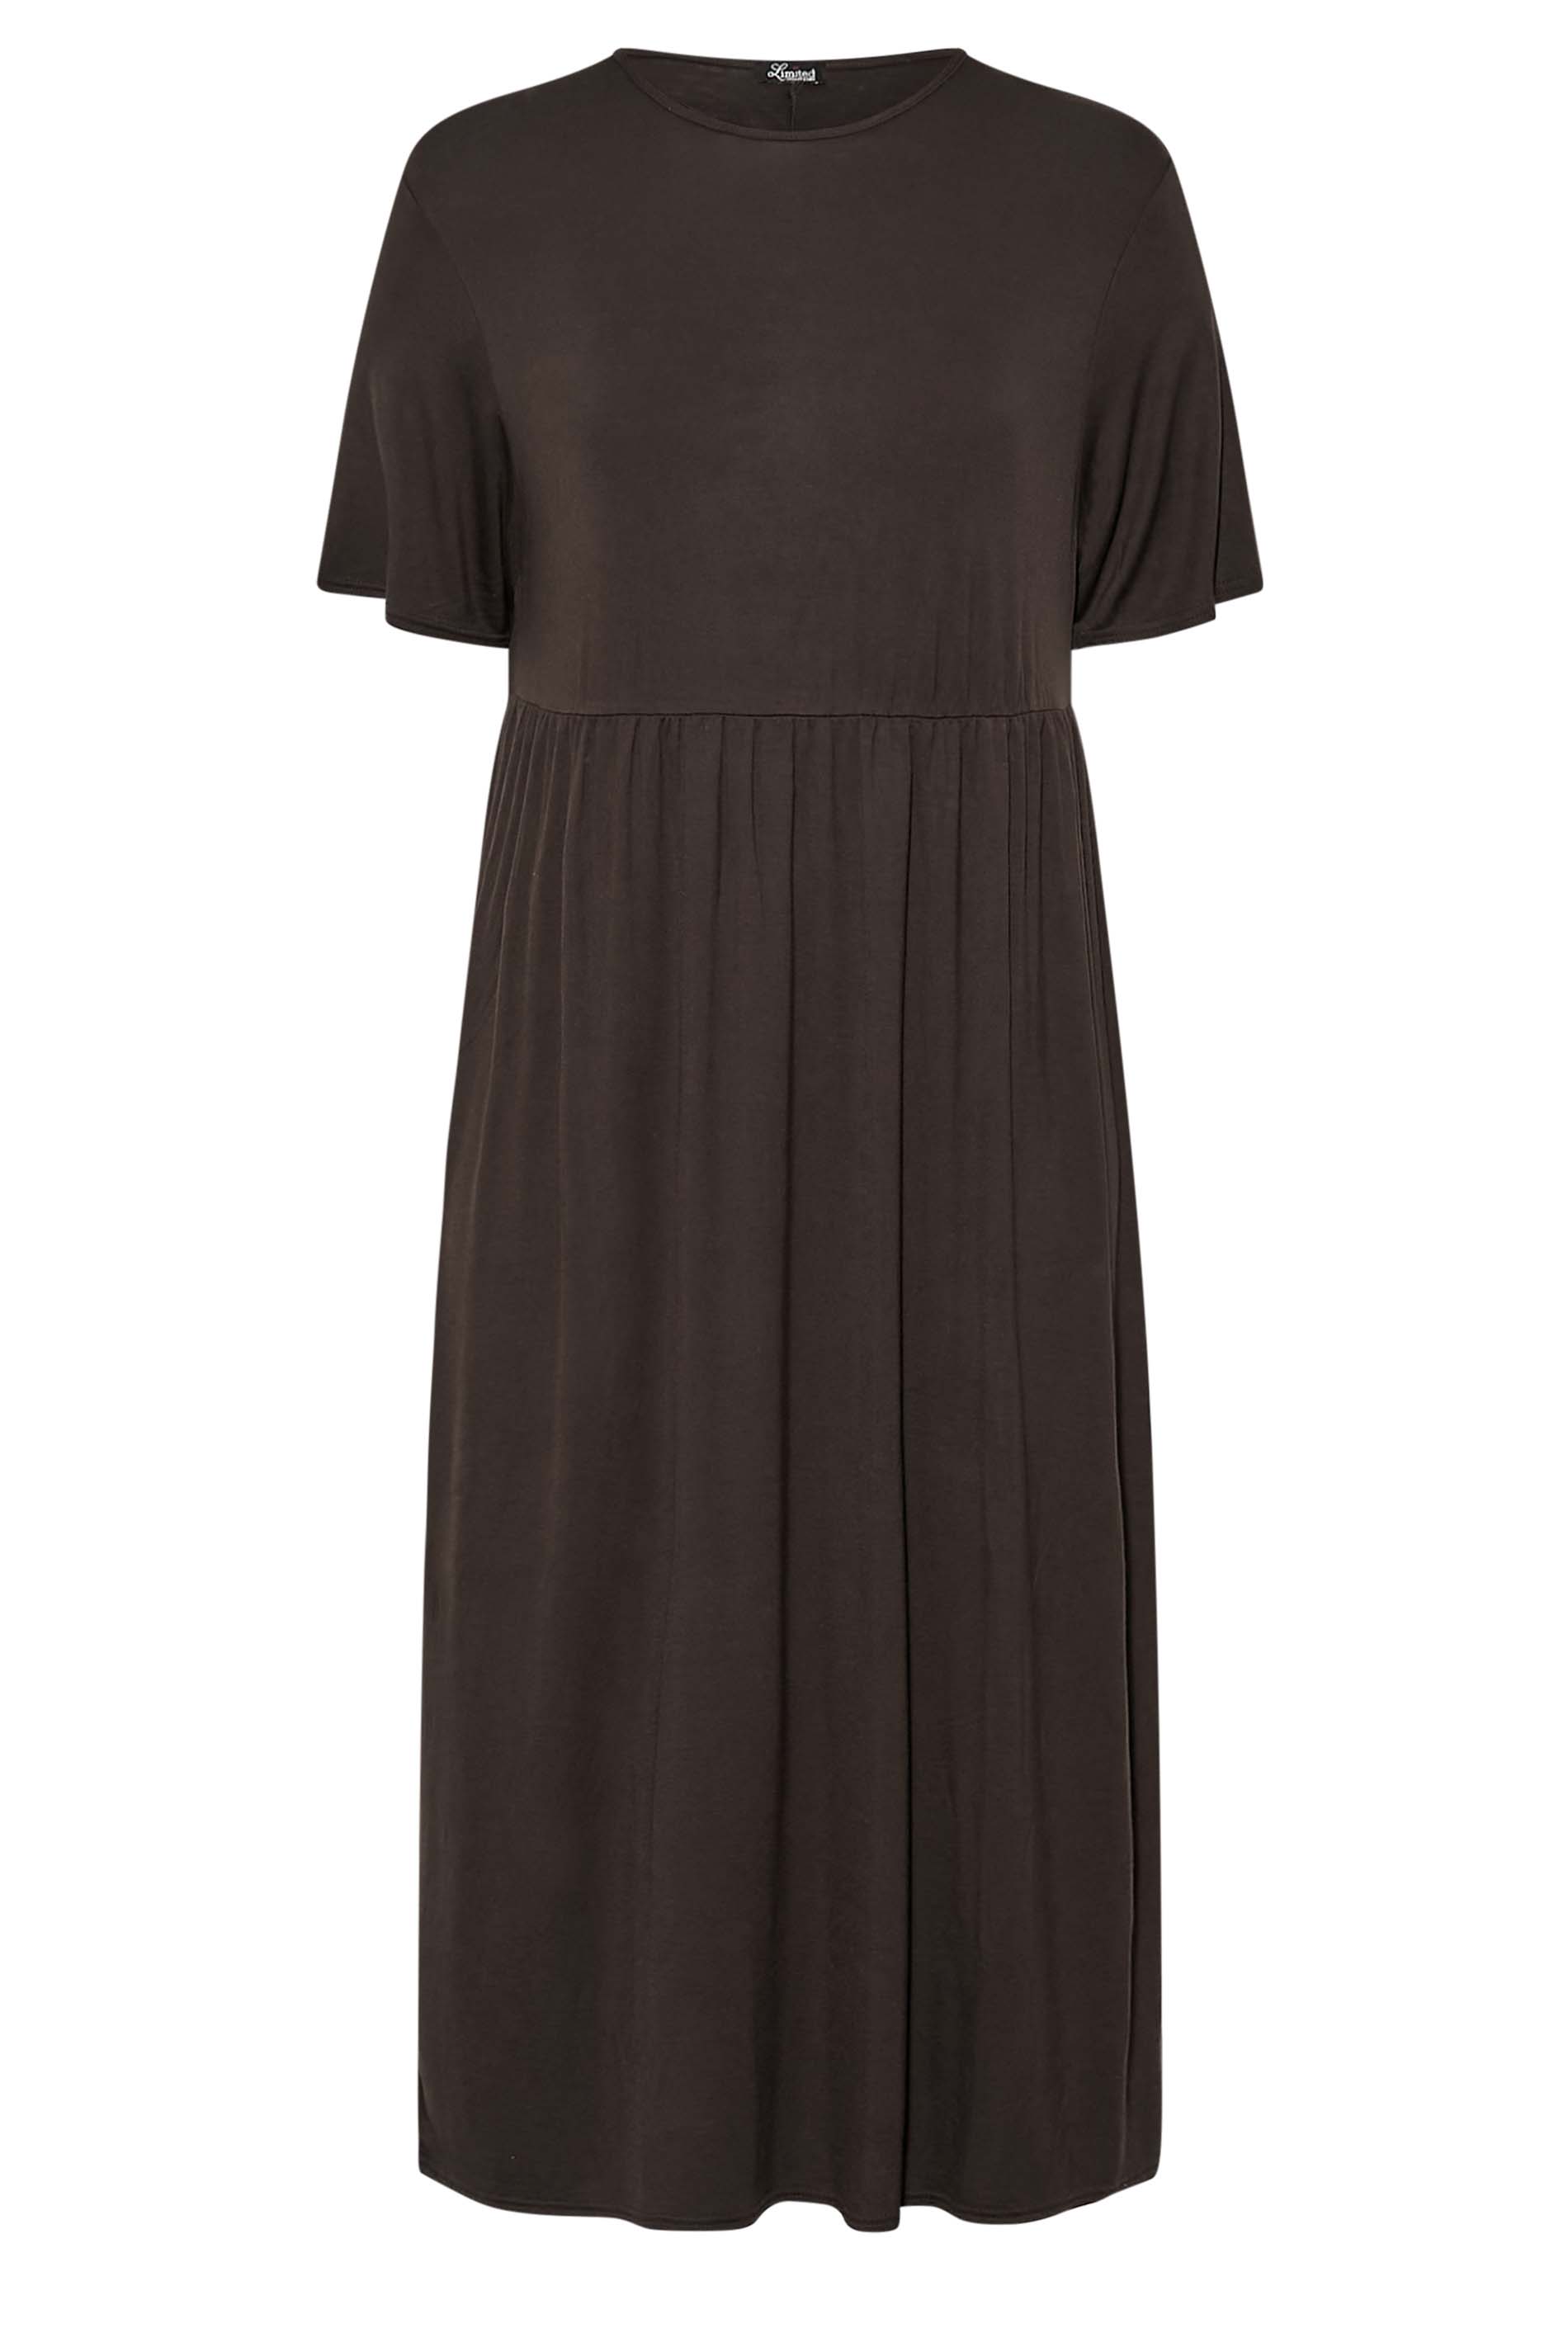 LIMITED COLLECTION Plus Size Chocolate Brown Throw On Maxi Dress ...